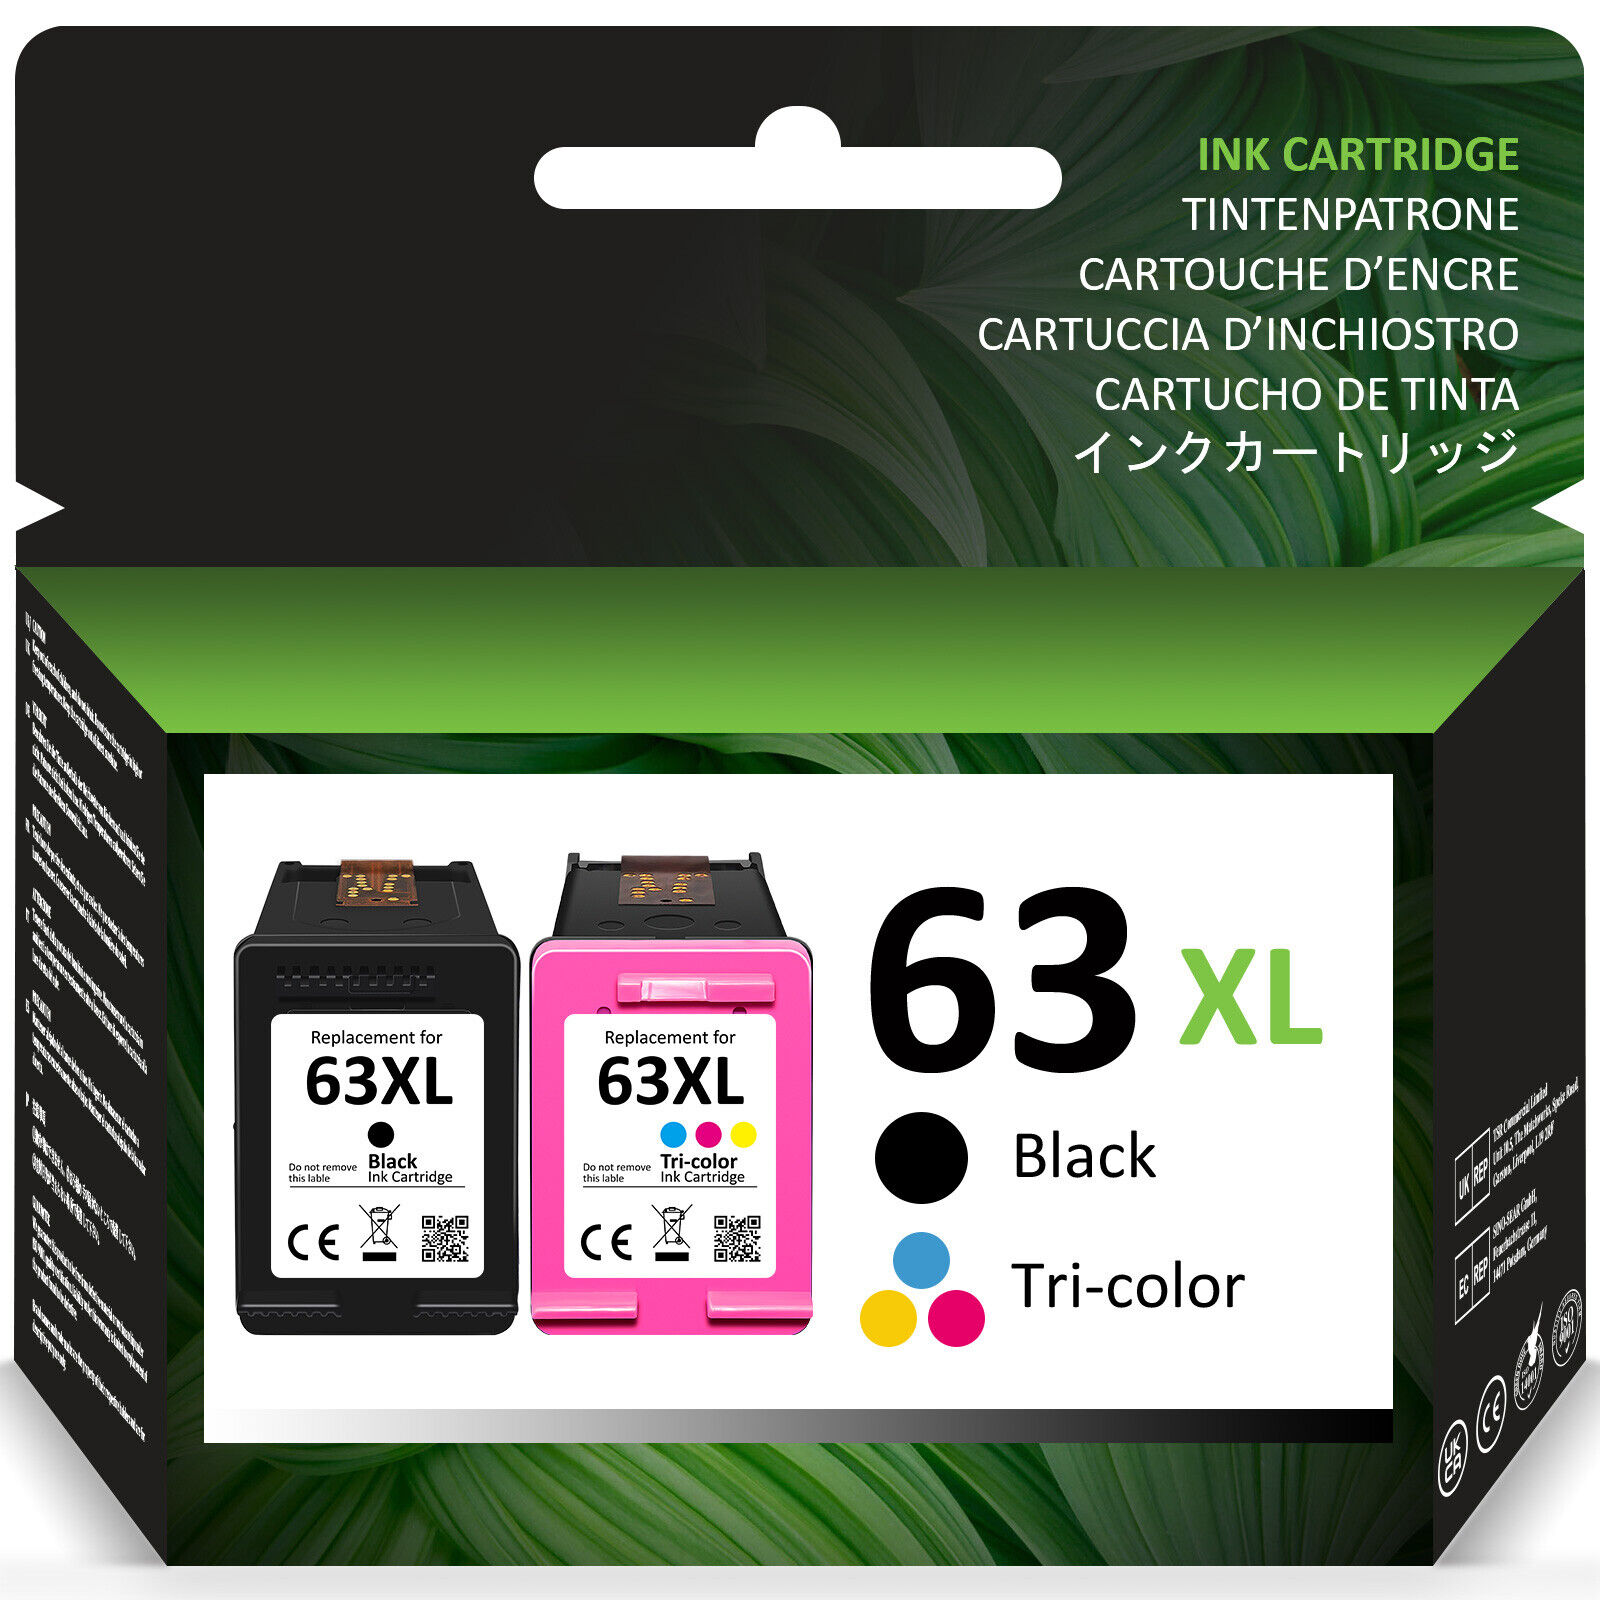 63 XL Ink Cartridge Compatible for HP OfficeJet 3830 4650 Envy 4520 4522 Printer